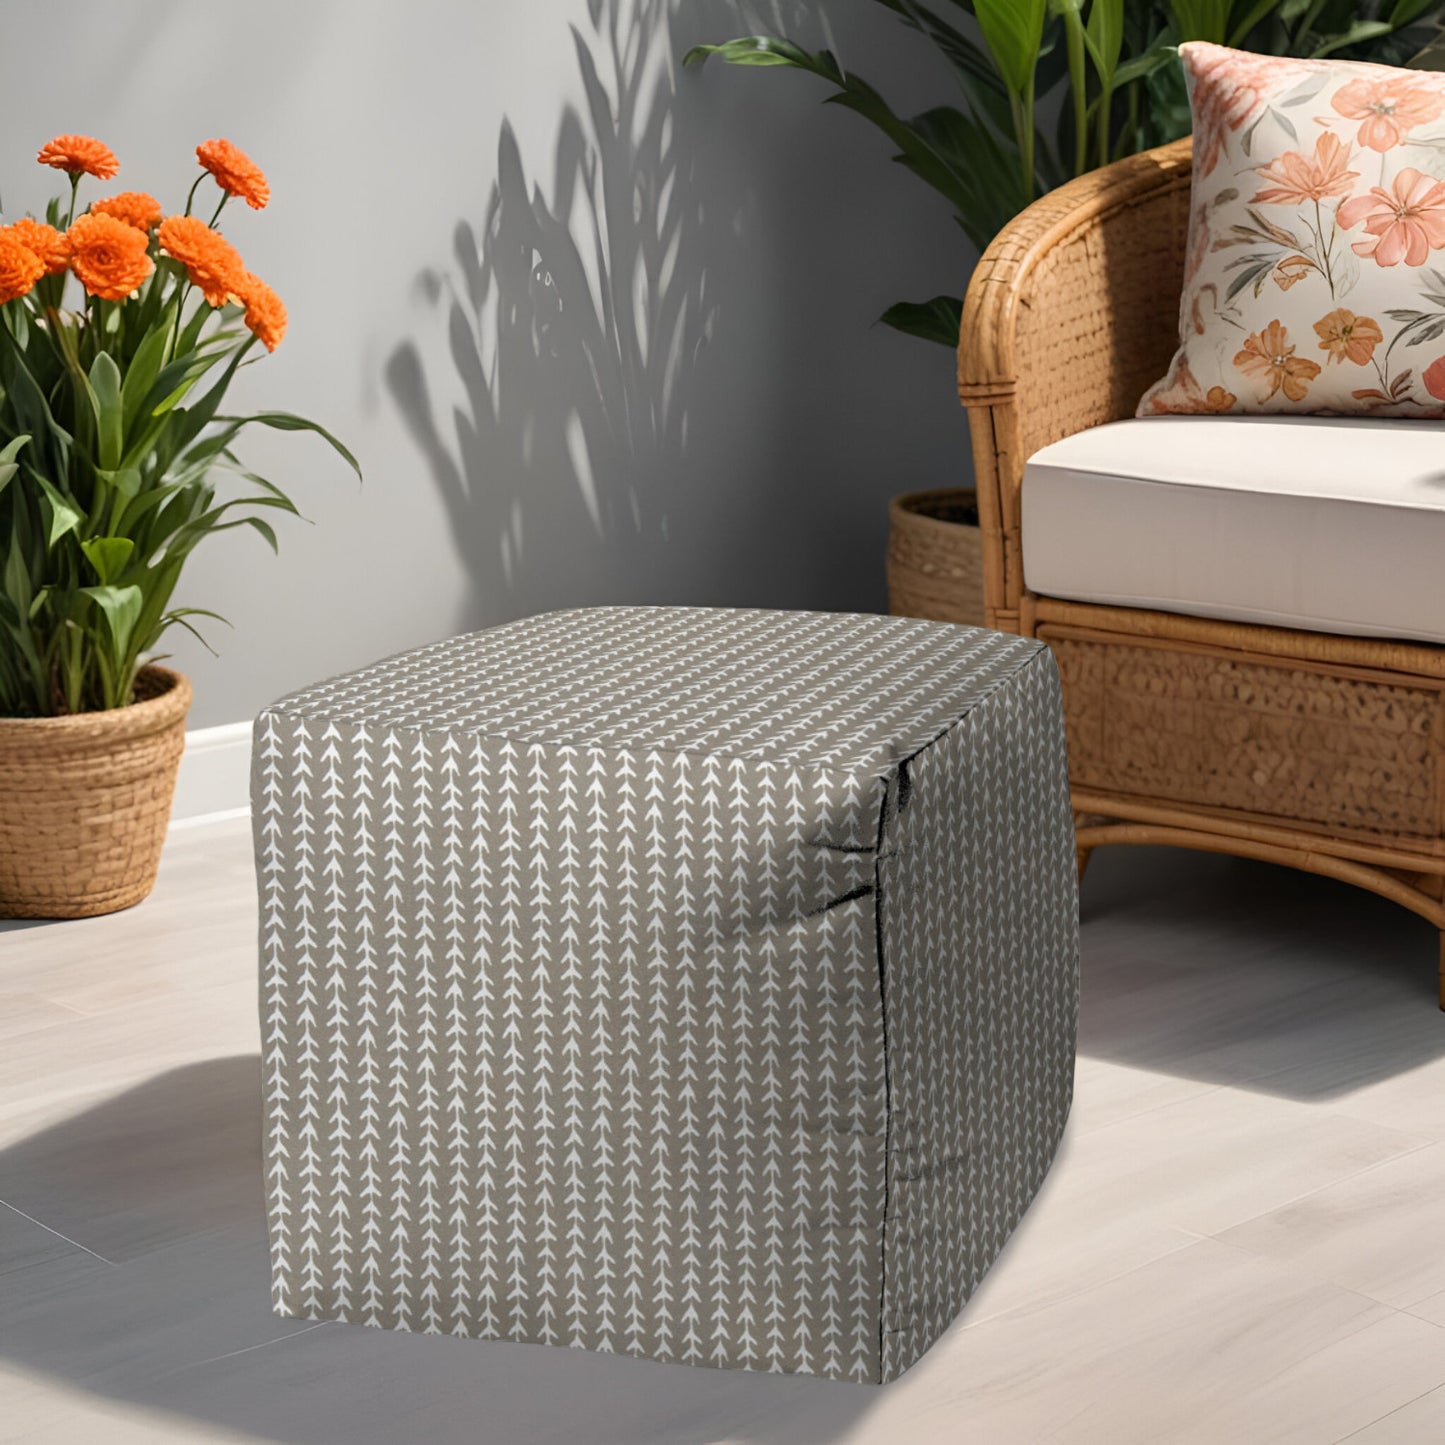 17" Taupe Polyester Cube Geometric Indoor Outdoor Pouf Ottoman